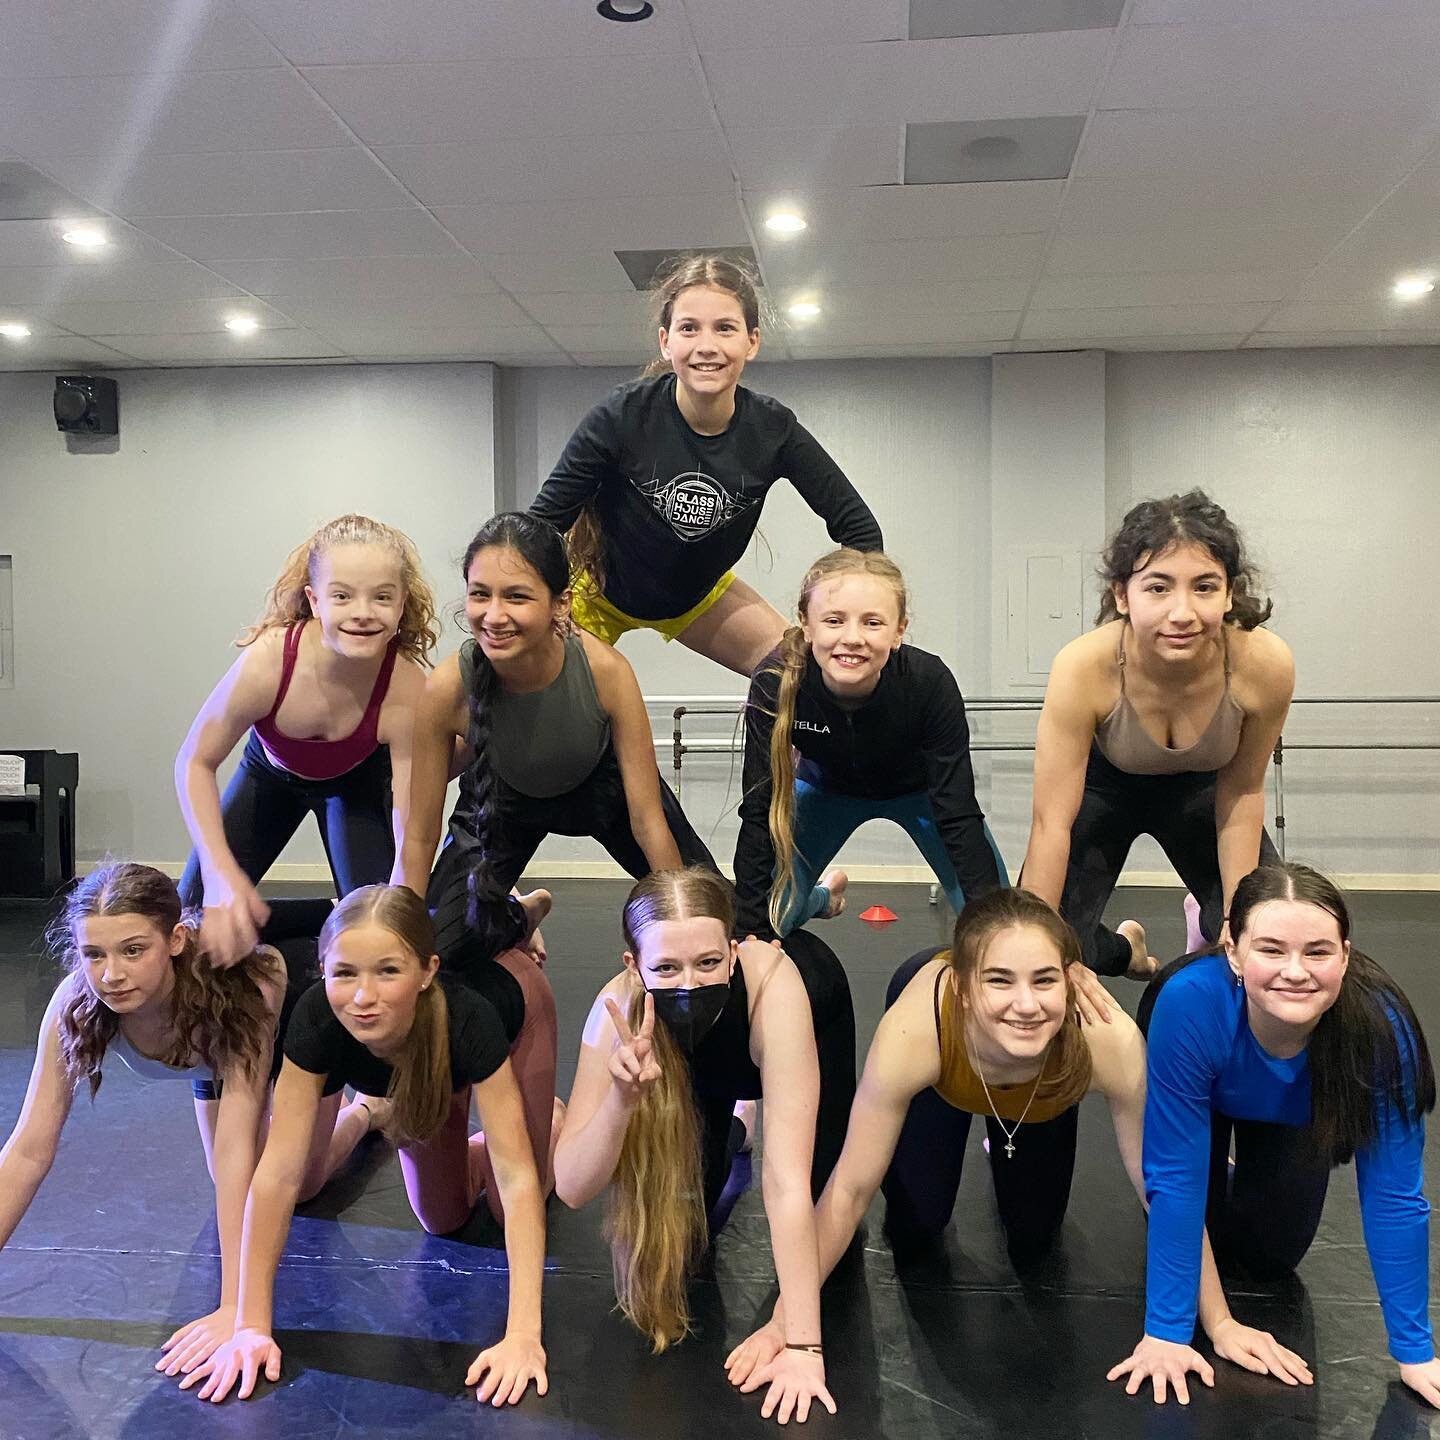 Did you know Hustle House trains dancers?  We do!  In fact we are the exclusive trainers for @glass_house_dance of Issaquah. 

Our Sport Performance classes for individual athletes and team trainings focus on all the components of overall athleticism